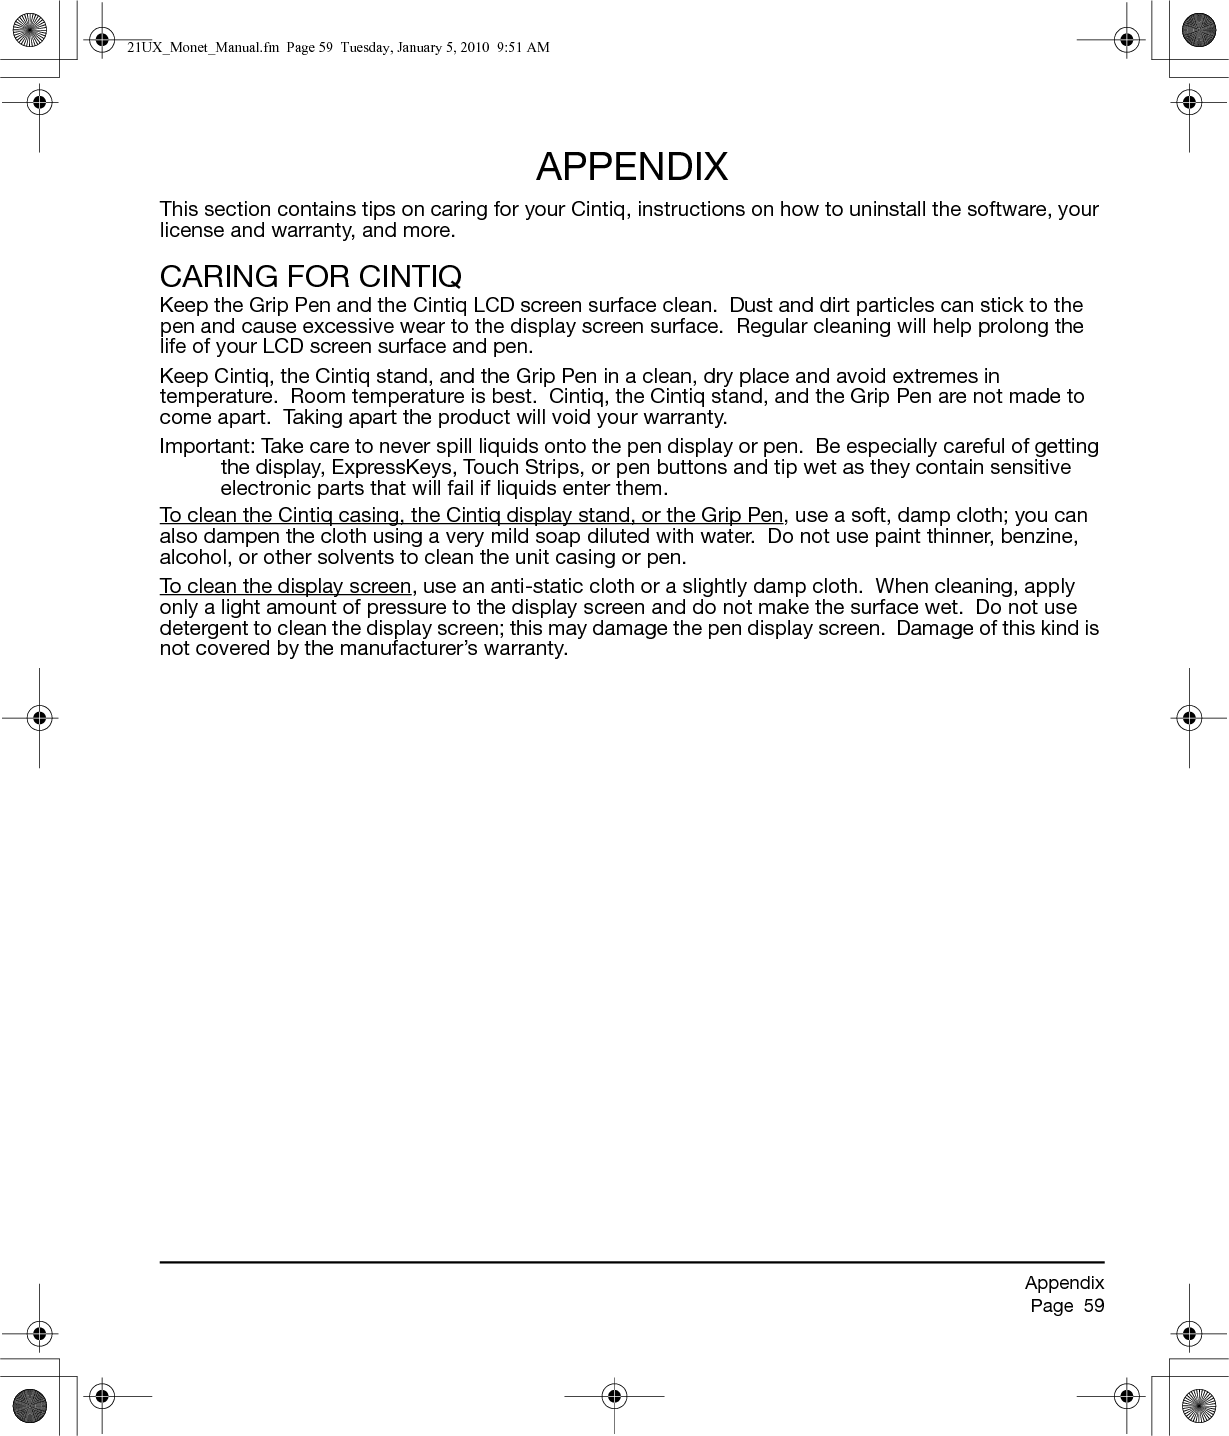 AppendixPage  59APPENDIXThis section contains tips on caring for your Cintiq, instructions on how to uninstall the software, your license and warranty, and more.CARING FOR CINTIQKeep the Grip Pen and the Cintiq LCD screen surface clean.  Dust and dirt particles can stick to the pen and cause excessive wear to the display screen surface.  Regular cleaning will help prolong the life of your LCD screen surface and pen.  Keep Cintiq, the Cintiq stand, and the Grip Pen in a clean, dry place and avoid extremes in temperature.  Room temperature is best.  Cintiq, the Cintiq stand, and the Grip Pen are not made to come apart.  Taking apart the product will void your warranty.Important: Take care to never spill liquids onto the pen display or pen.  Be especially careful of getting the display, ExpressKeys, Touch Strips, or pen buttons and tip wet as they contain sensitive electronic parts that will fail if liquids enter them.To clean the Cintiq casing, the Cintiq display stand, or the Grip Pen, use a soft, damp cloth; you can also dampen the cloth using a very mild soap diluted with water.  Do not use paint thinner, benzine, alcohol, or other solvents to clean the unit casing or pen.To clean the display screen, use an anti-static cloth or a slightly damp cloth.  When cleaning, apply only a light amount of pressure to the display screen and do not make the surface wet.  Do not use detergent to clean the display screen; this may damage the pen display screen.  Damage of this kind is not covered by the manufacturer’s warranty.21UX_Monet_Manual.fm  Page 59  Tuesday, January 5, 2010  9:51 AM